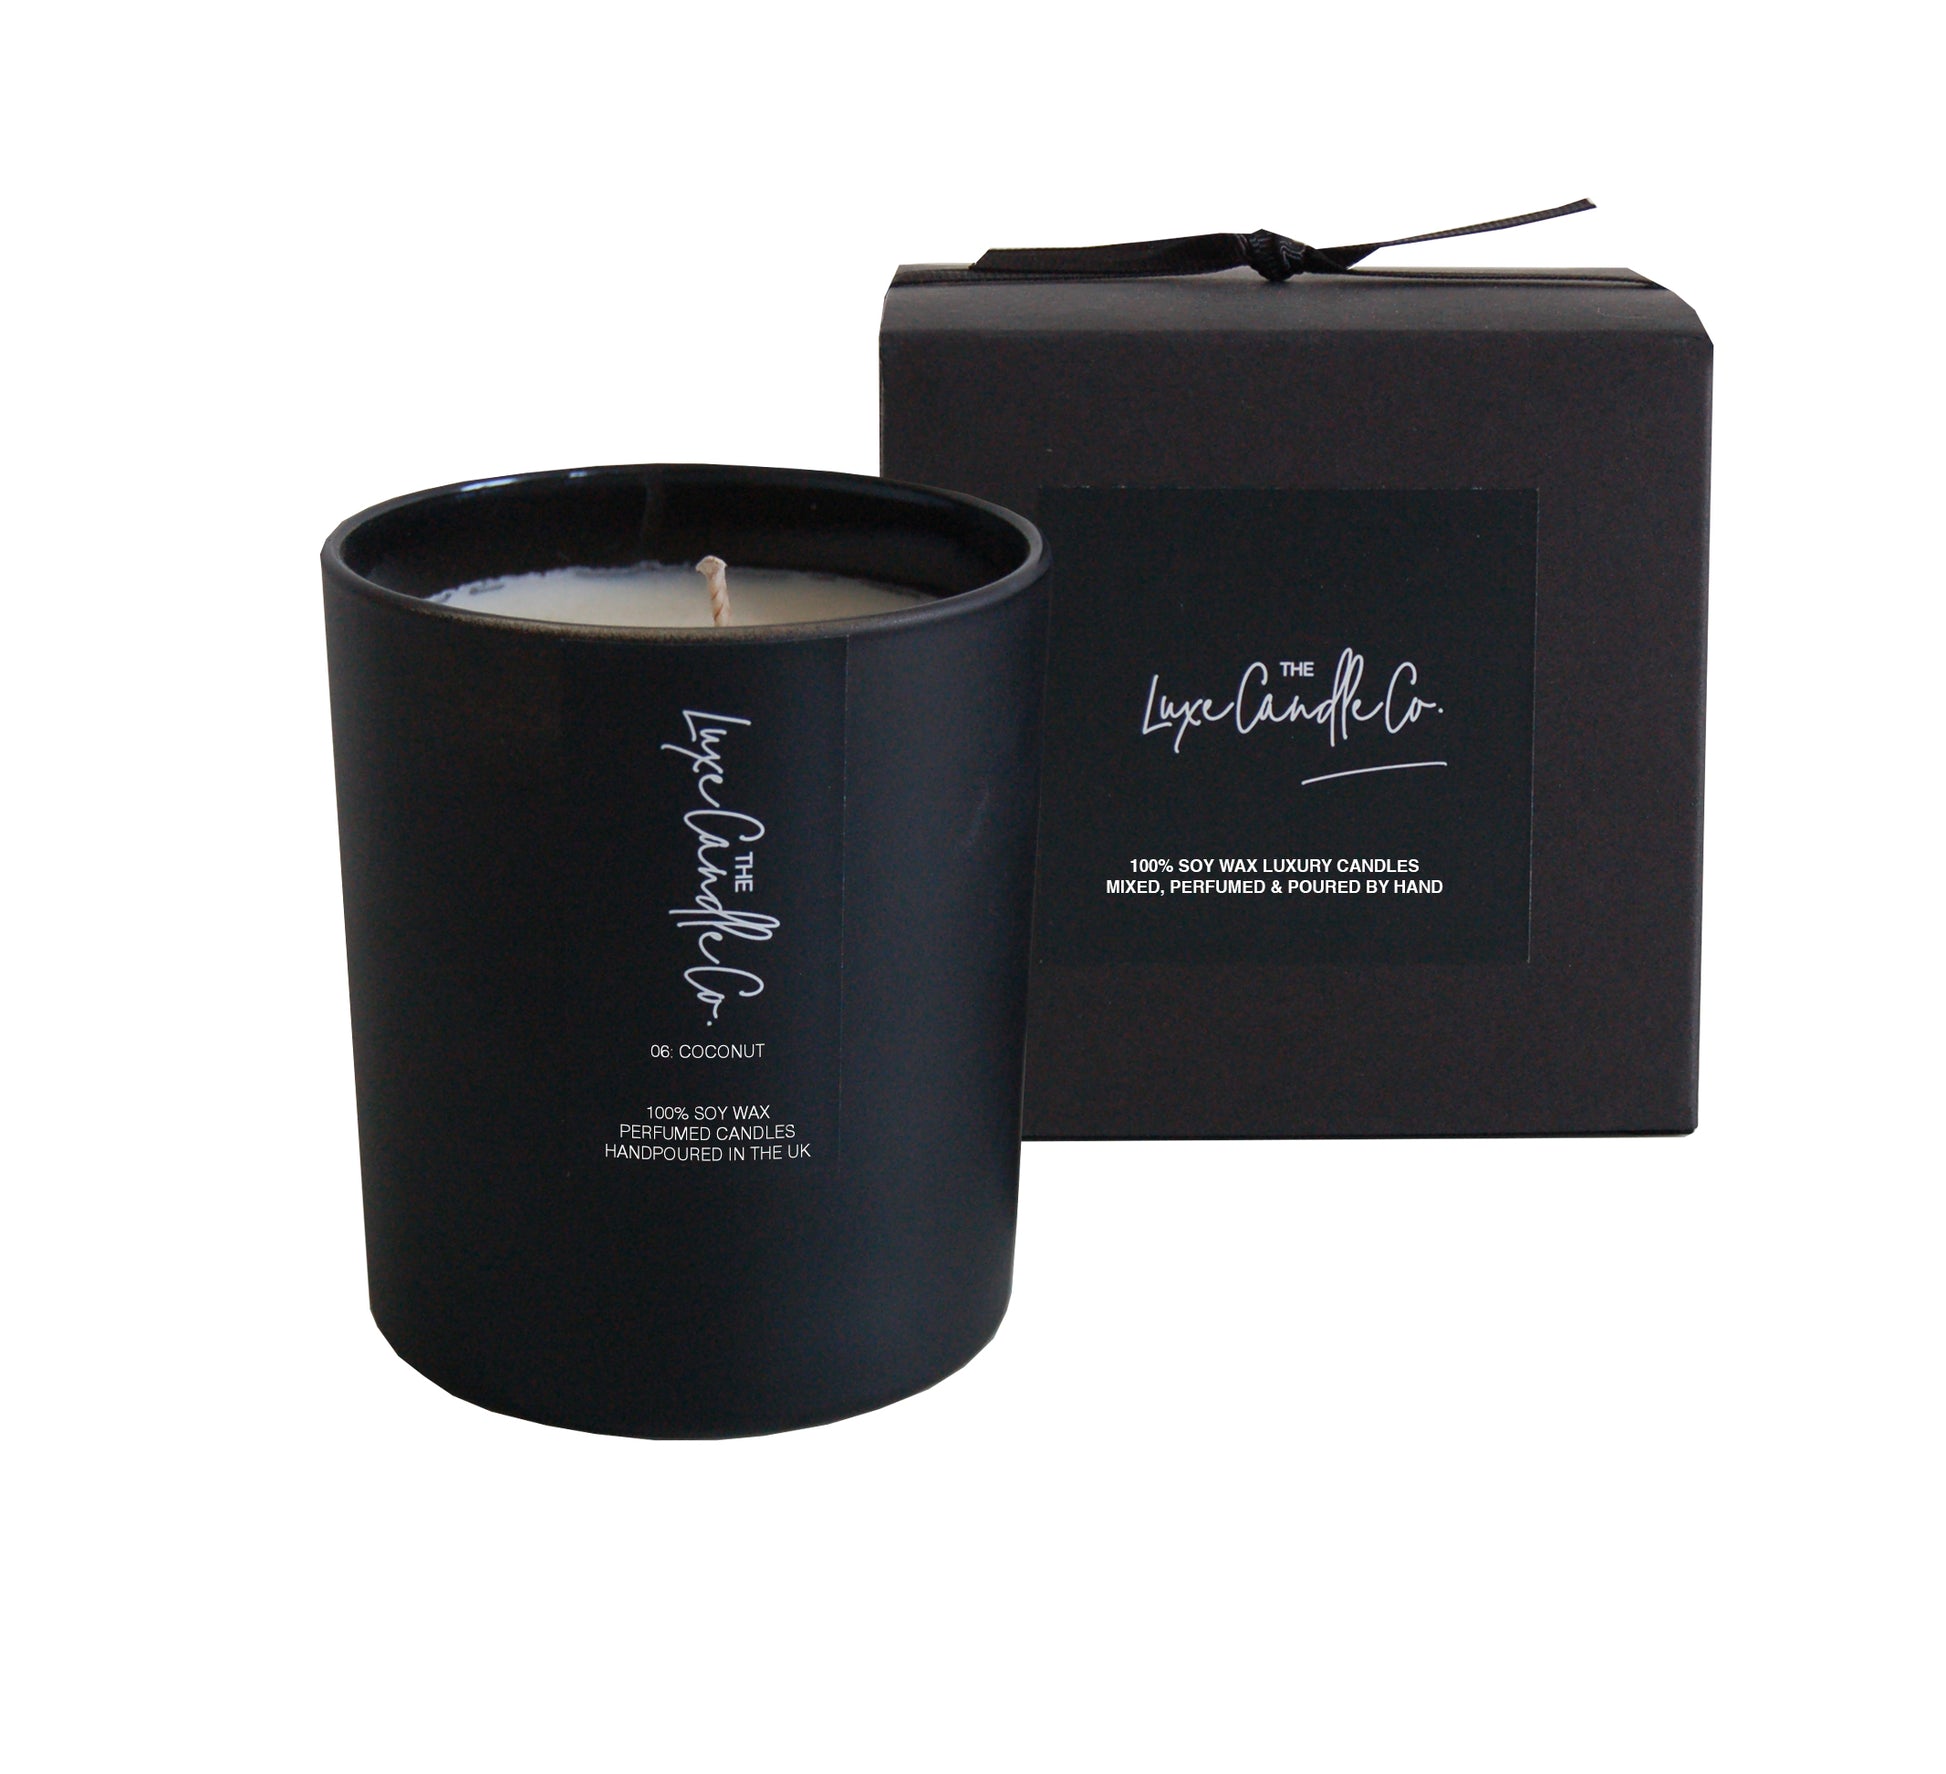 Luxury soy wax candle with coconut scent fragrance in black glass jar